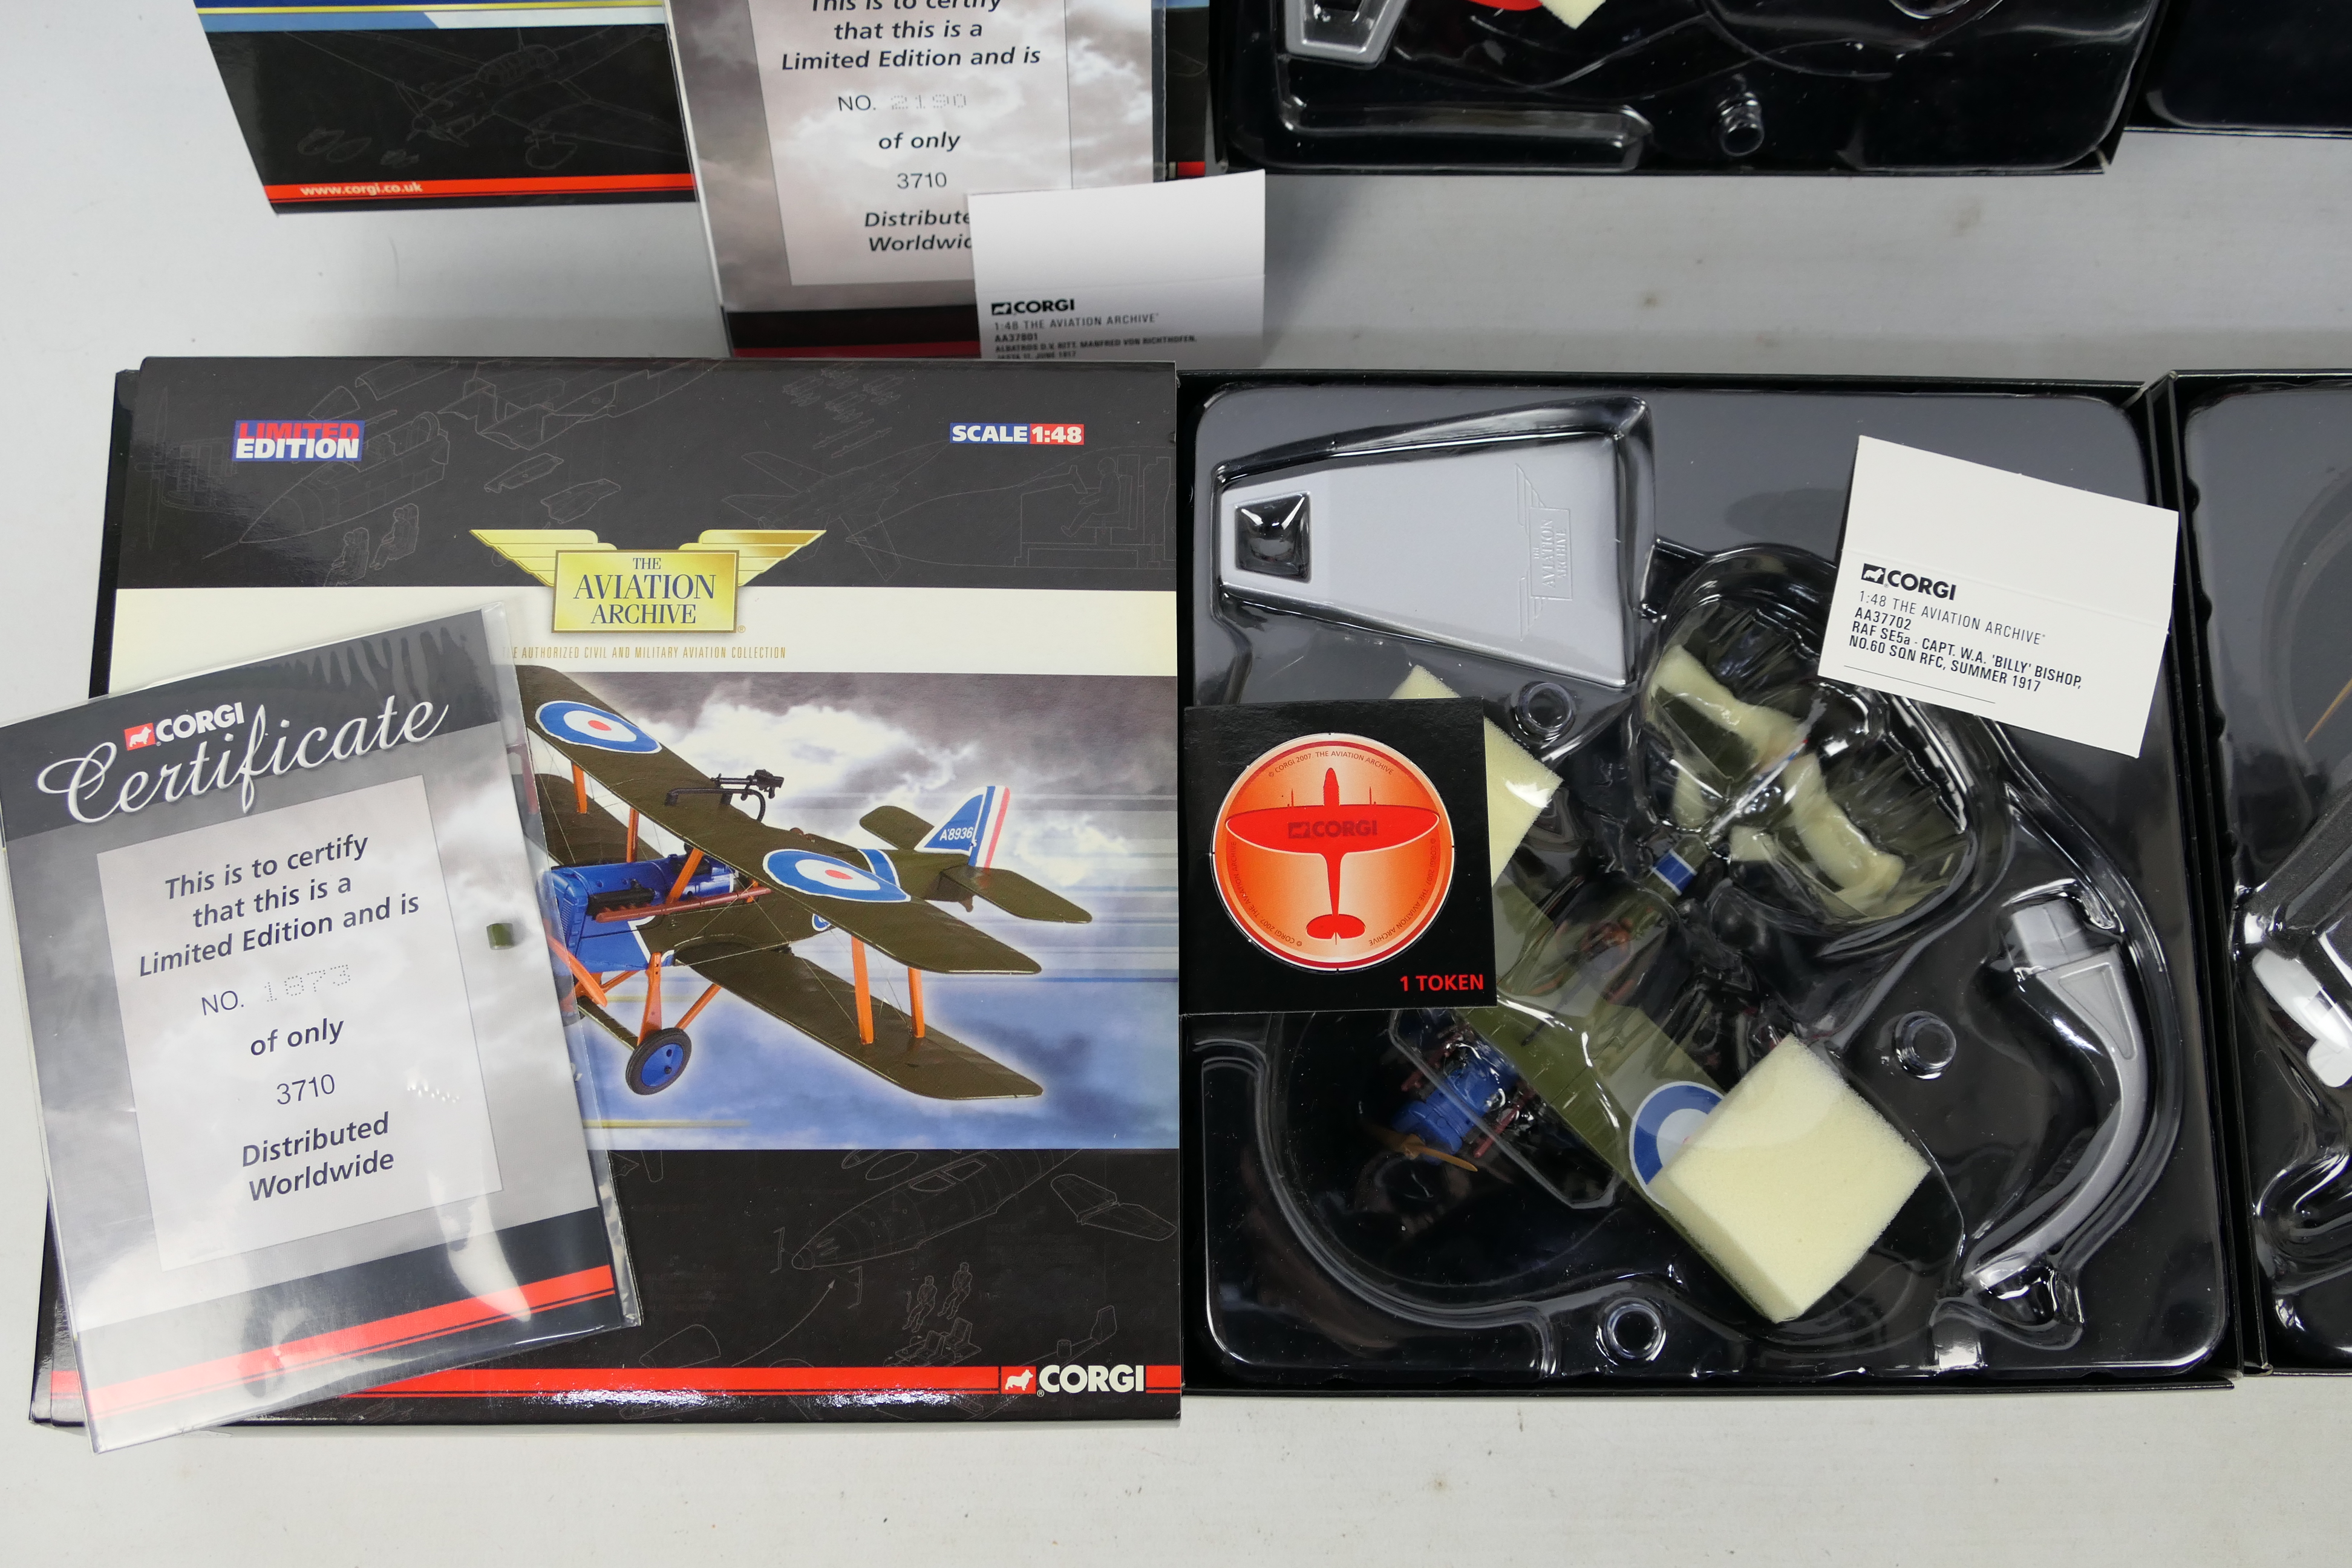 Corgi Aviation Archive - 4 x limited edition aircraft in 1:48 scale, - Image 4 of 5